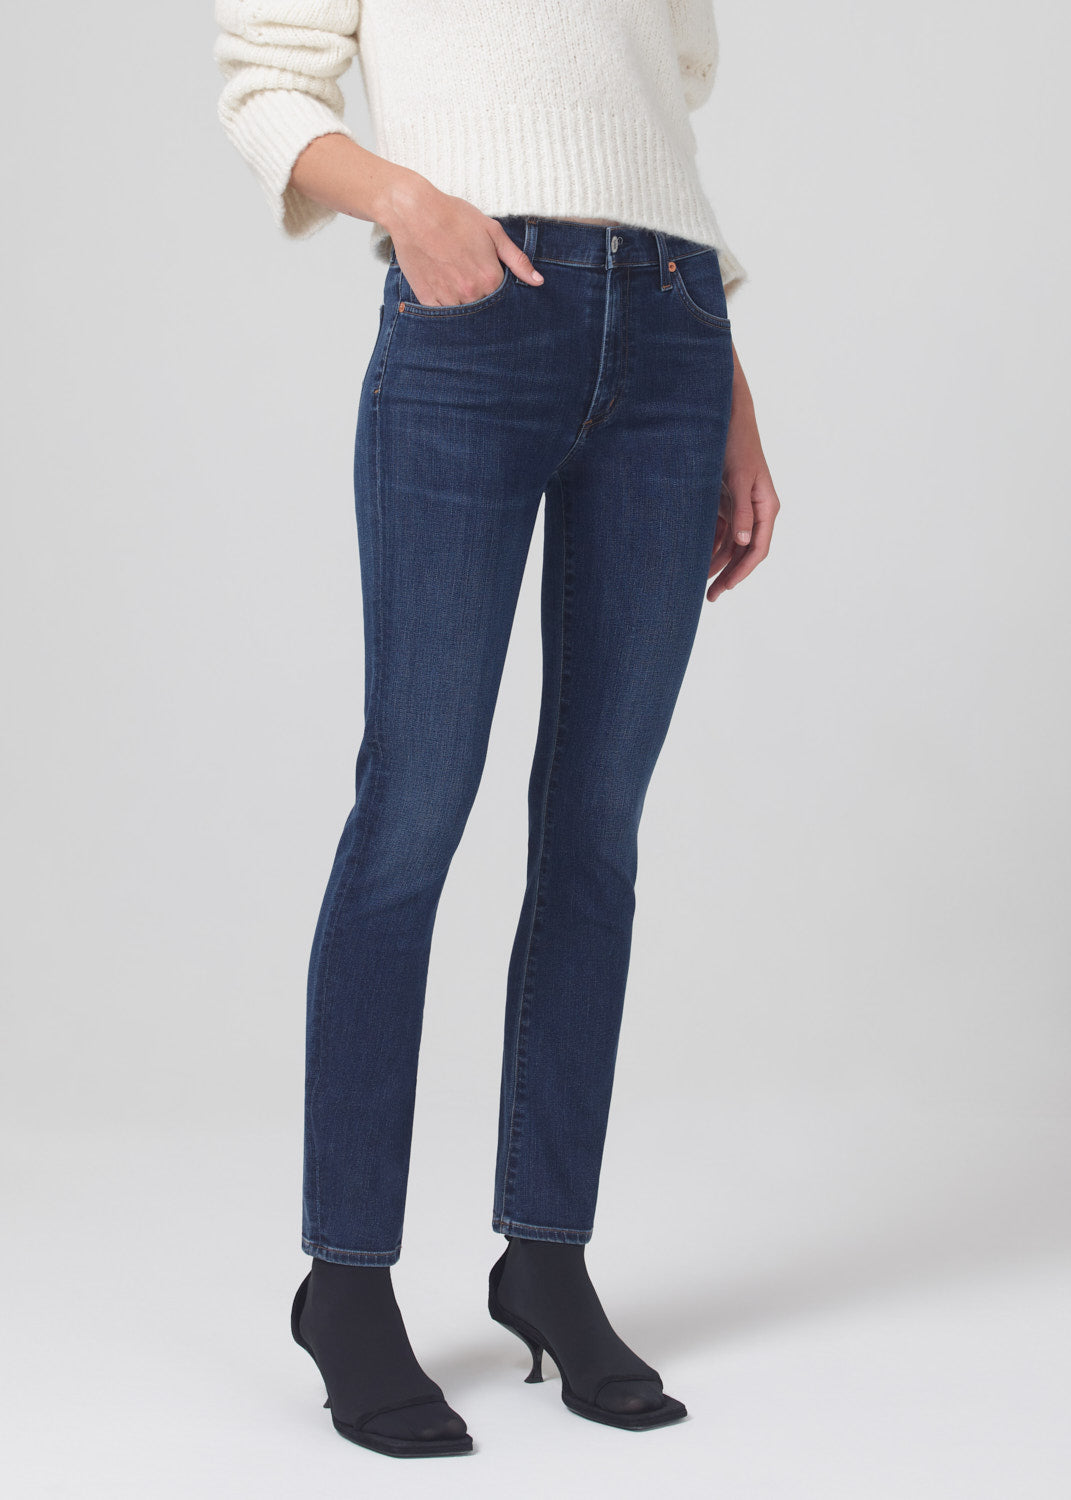 citizens of humanity skyla mid rise jean in dark blue front